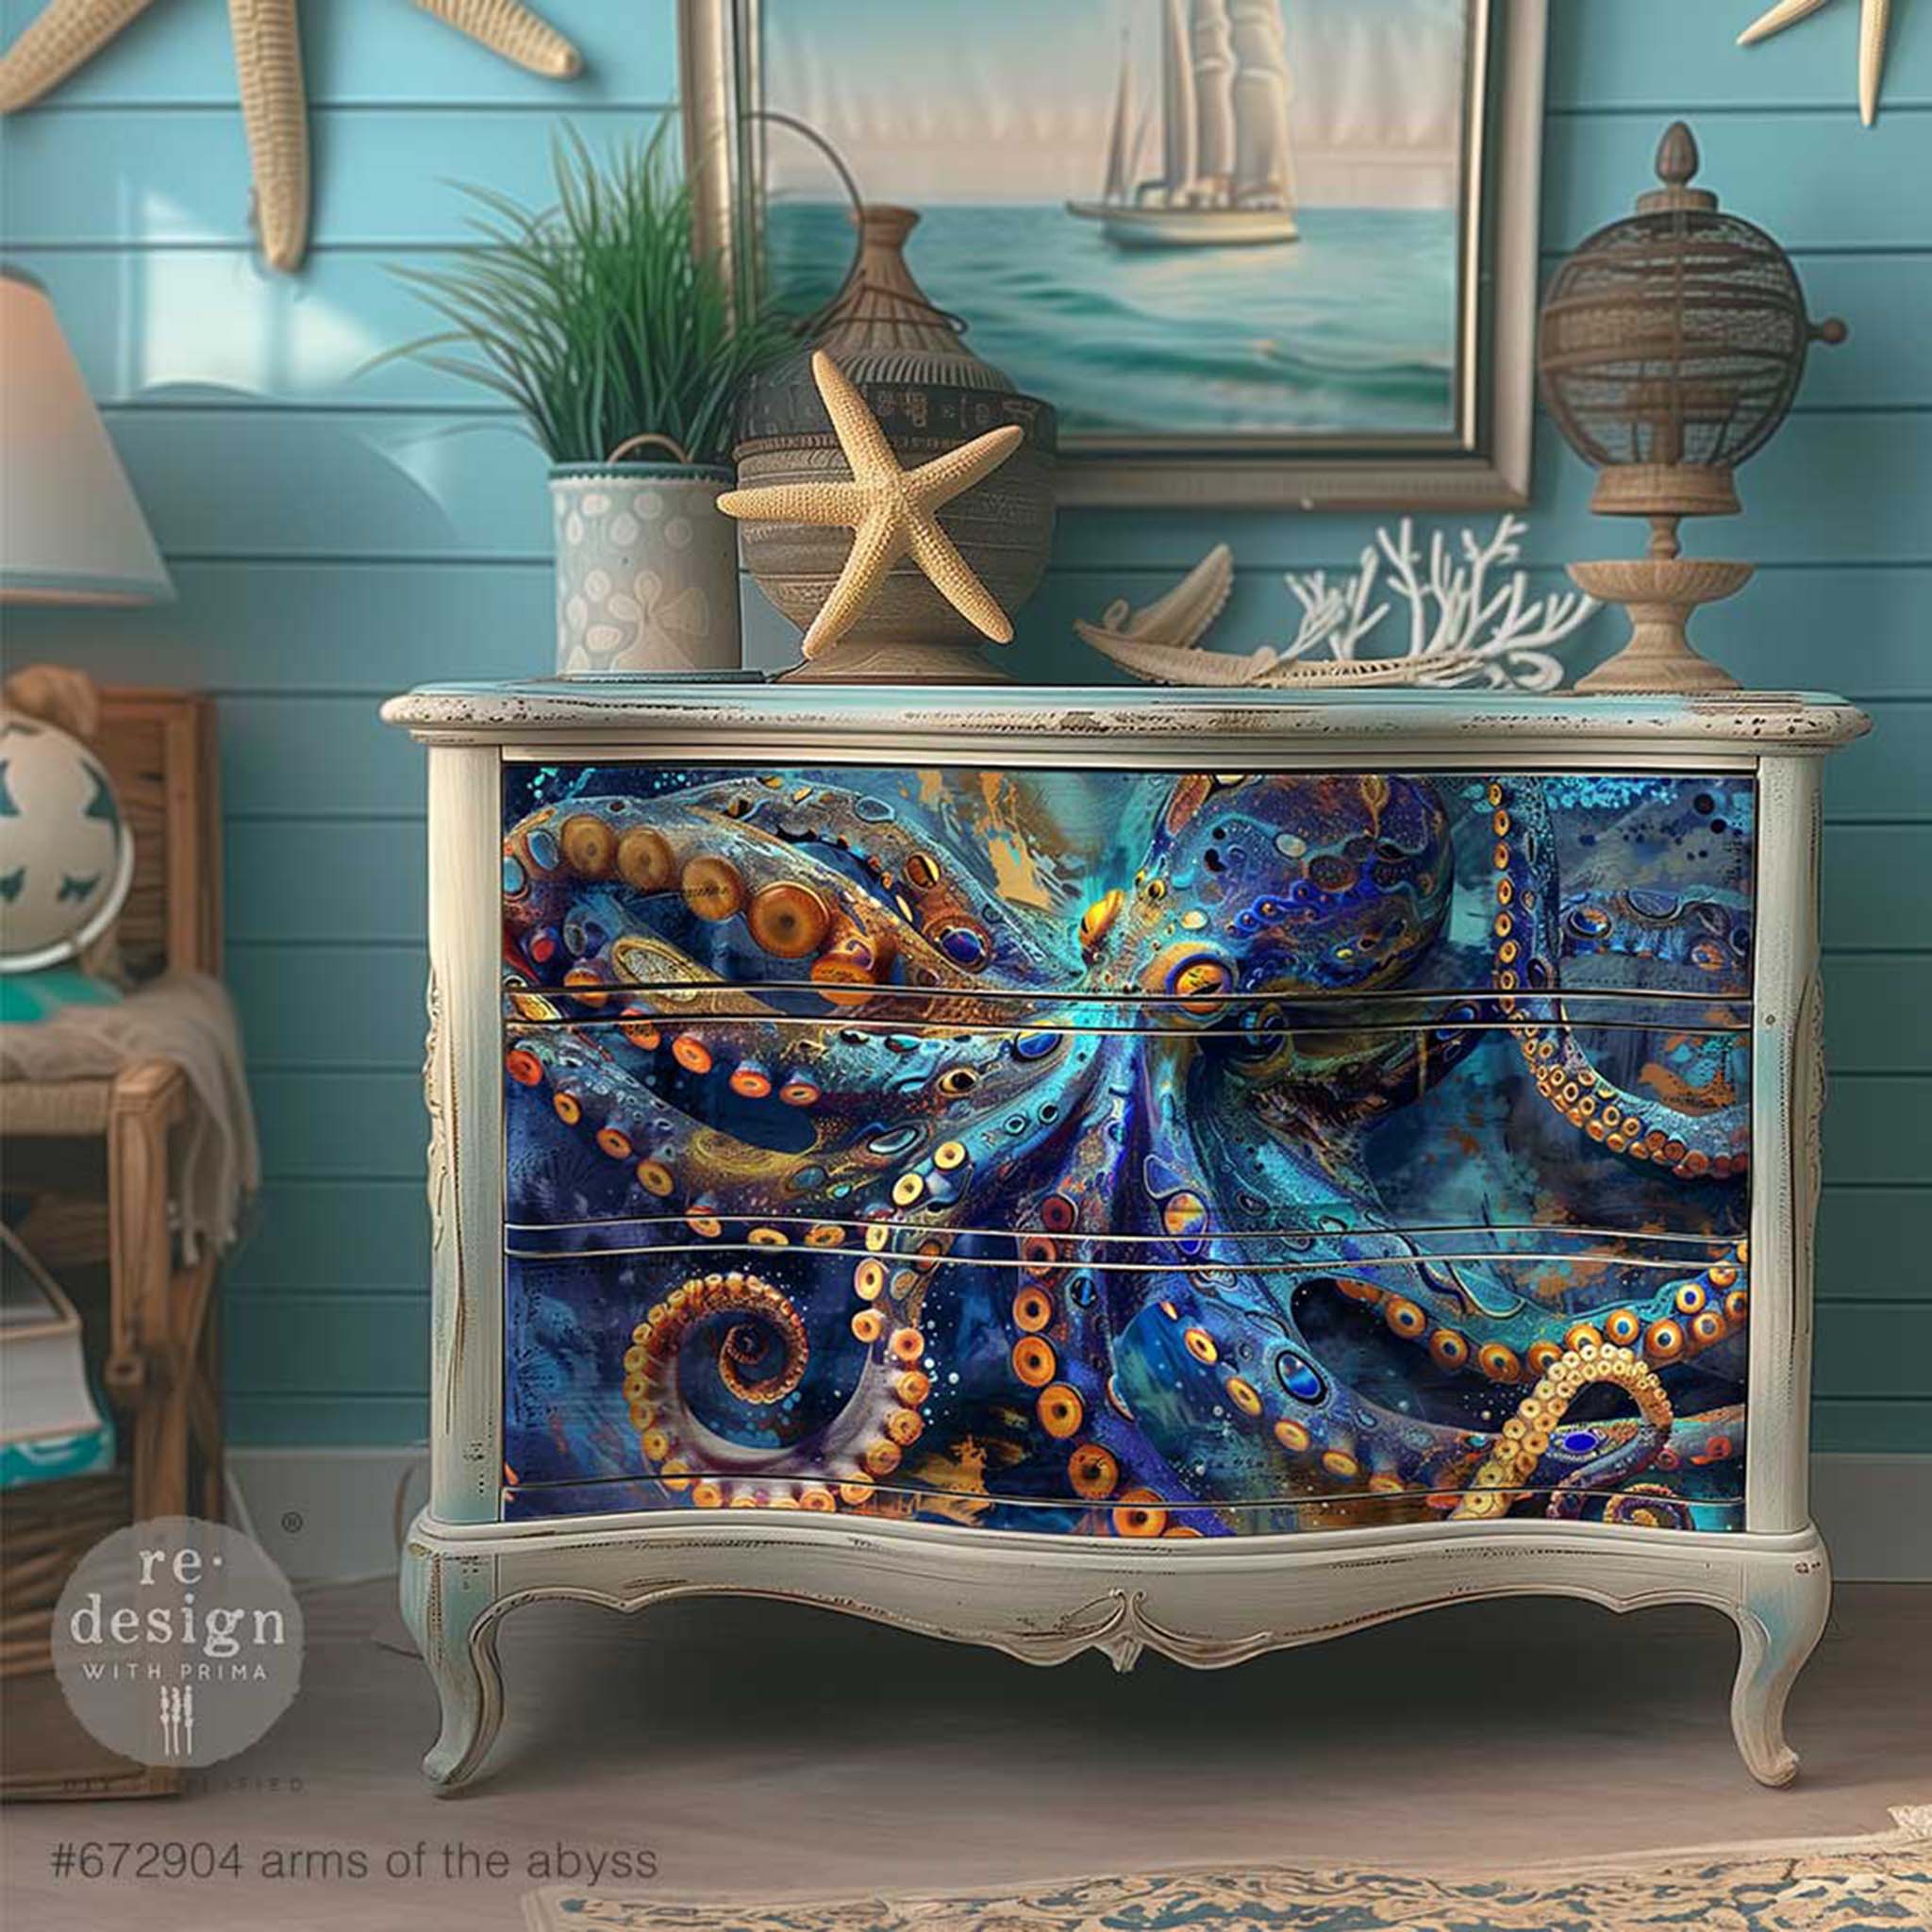 A vintage 3-drawer dresser is painted beige and features ReDesign with Prima's Arms of the Abyss A1 fiber paper on the drawers.